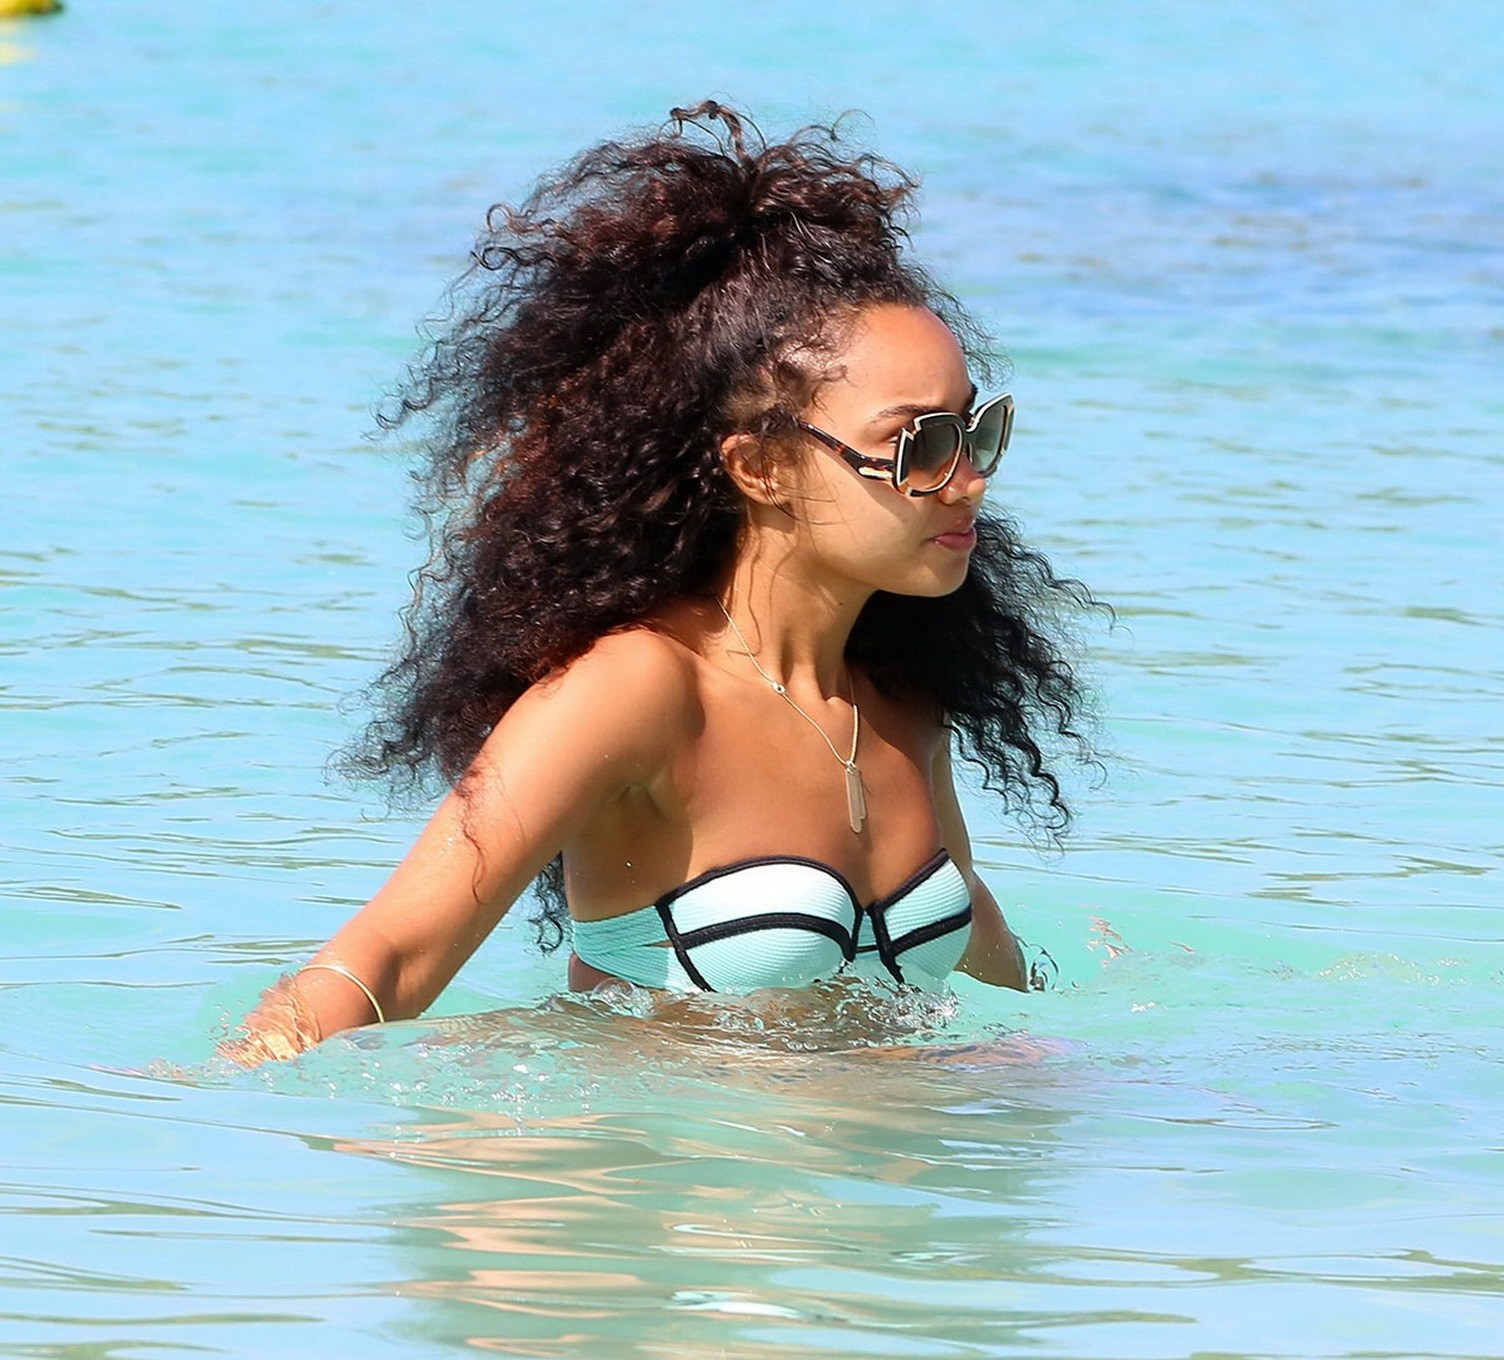 LeighAnne Pinnock wearing tiny strapless bikini at the beach in Barbados #75177606